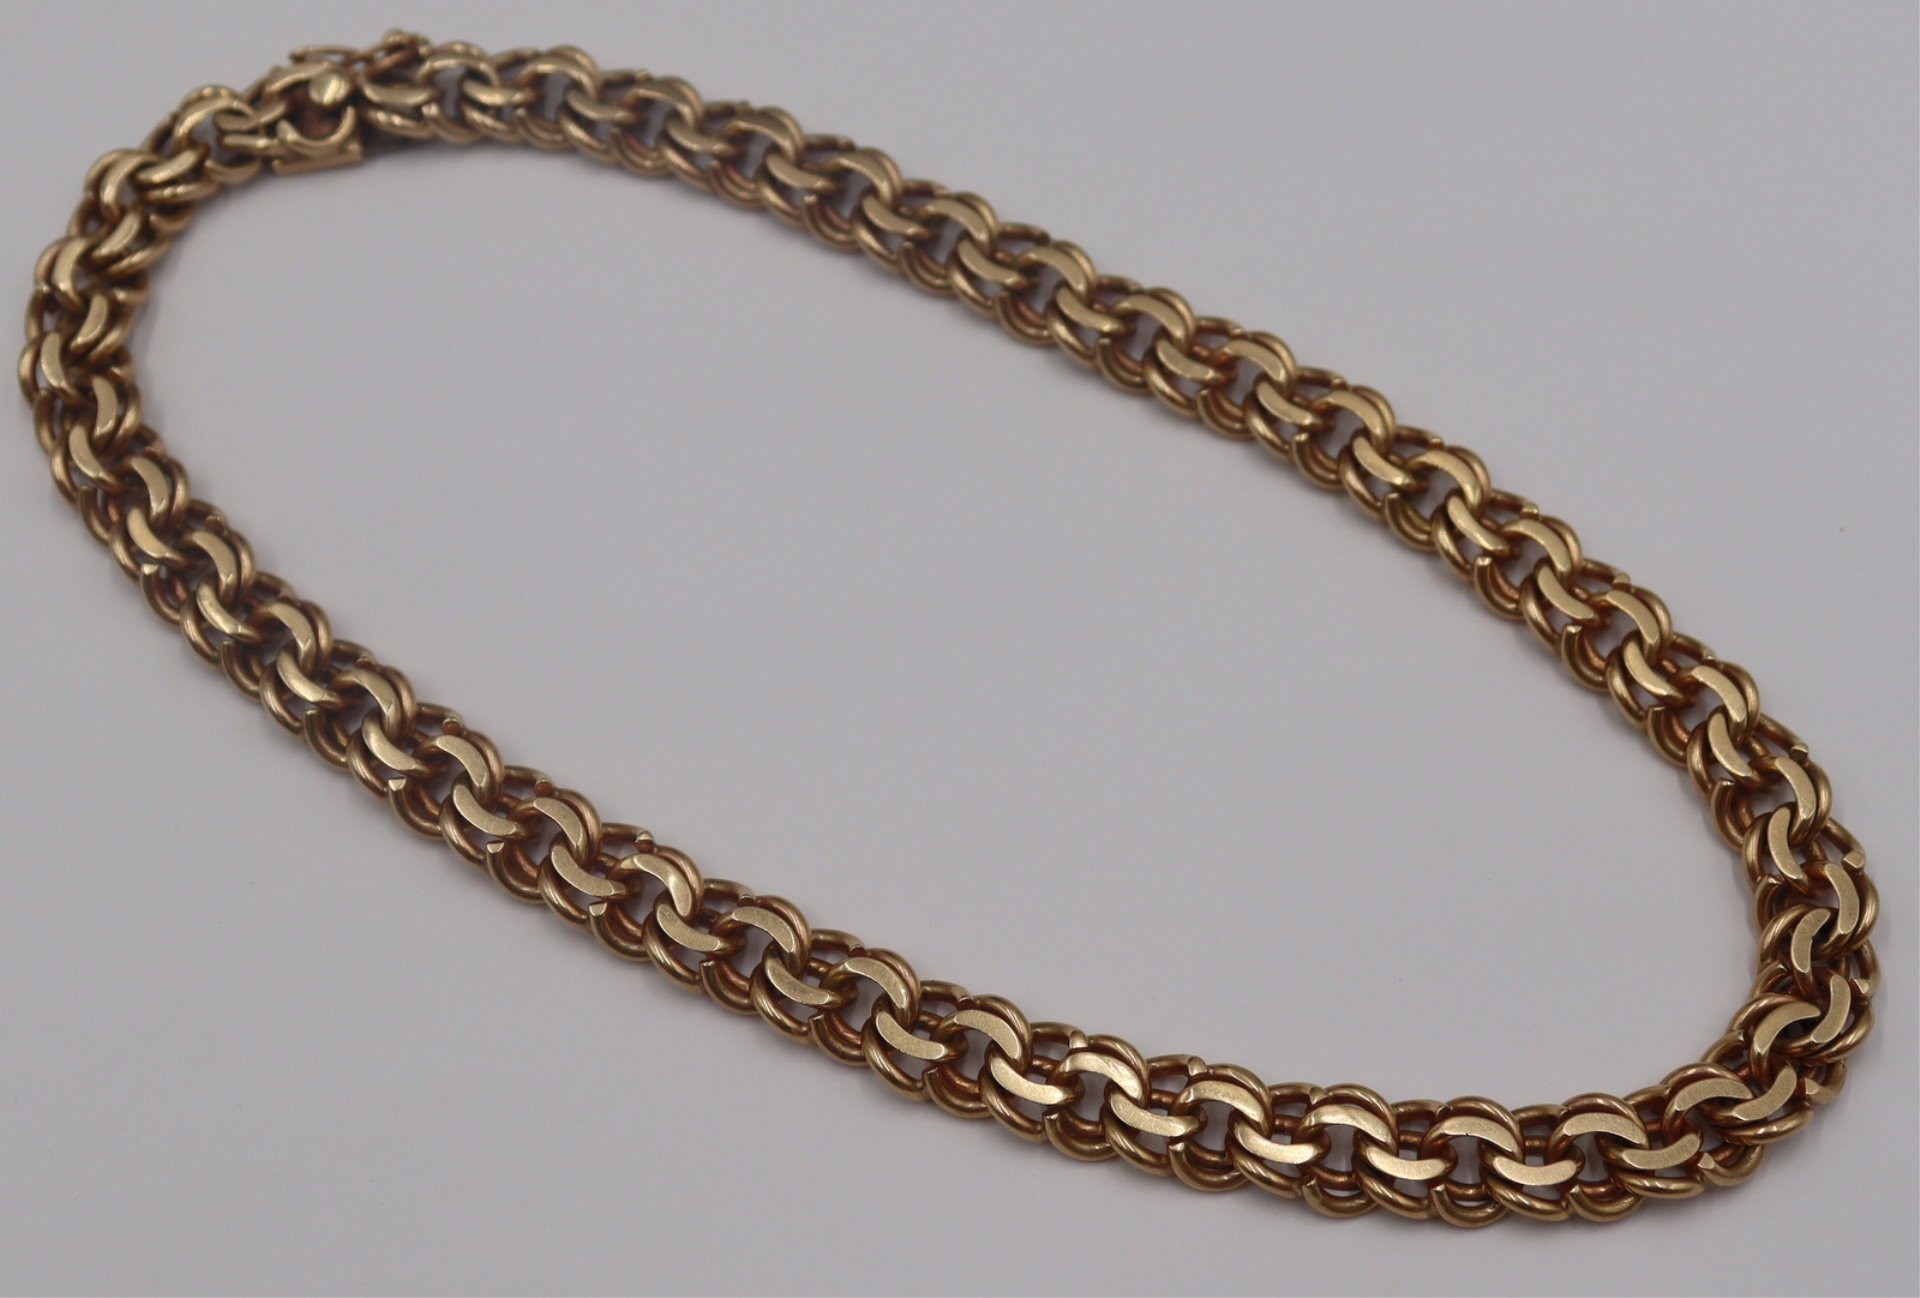 JEWELRY. 14KT GOLD CHAIN LINK NECKLACE.